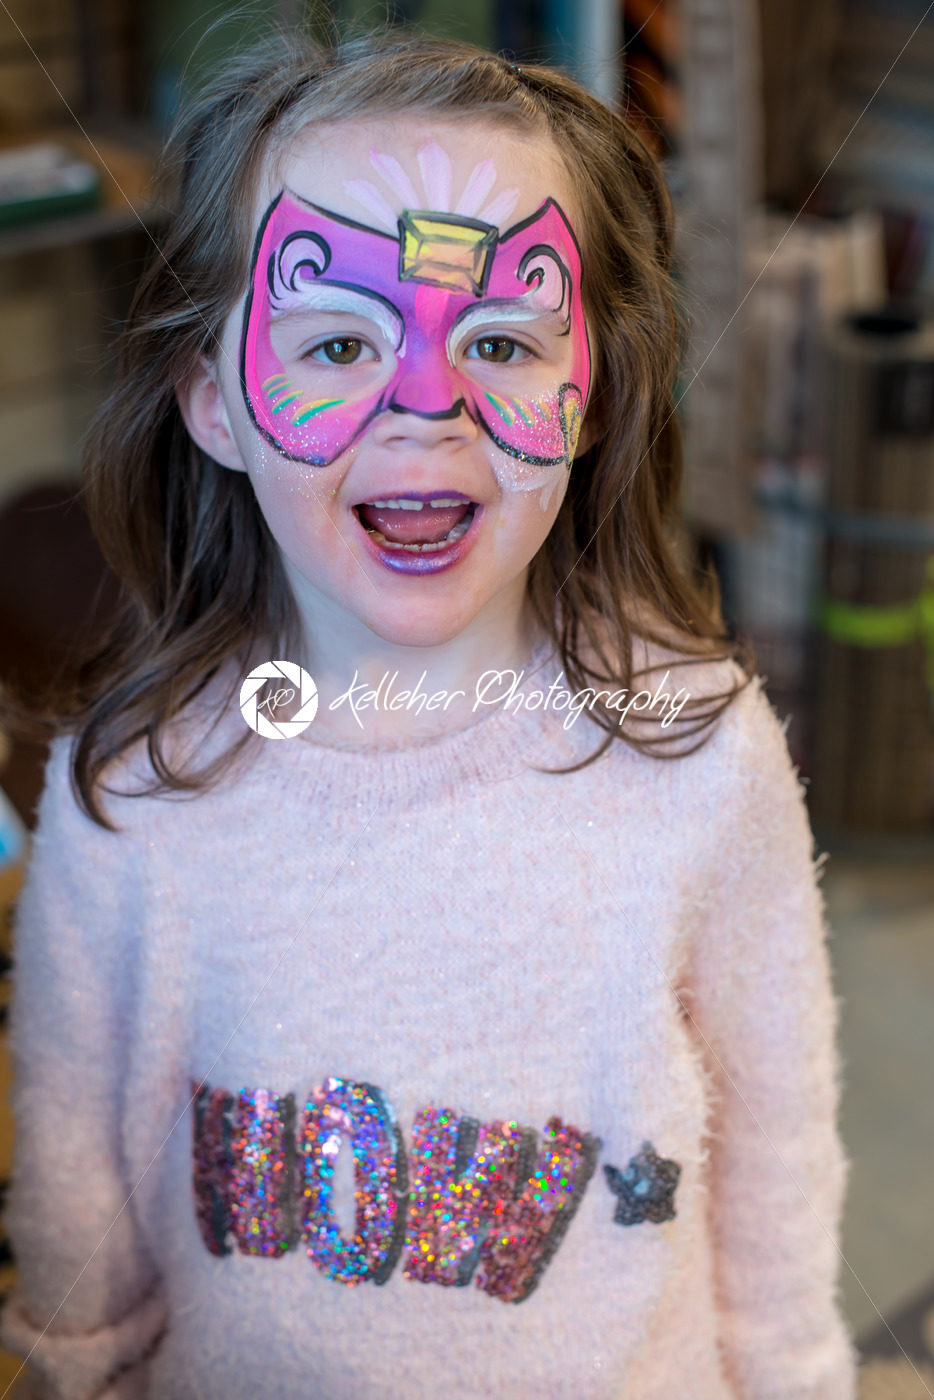 Pretty excited cute young girl with face painting like a butterfly - Kelleher Photography Store